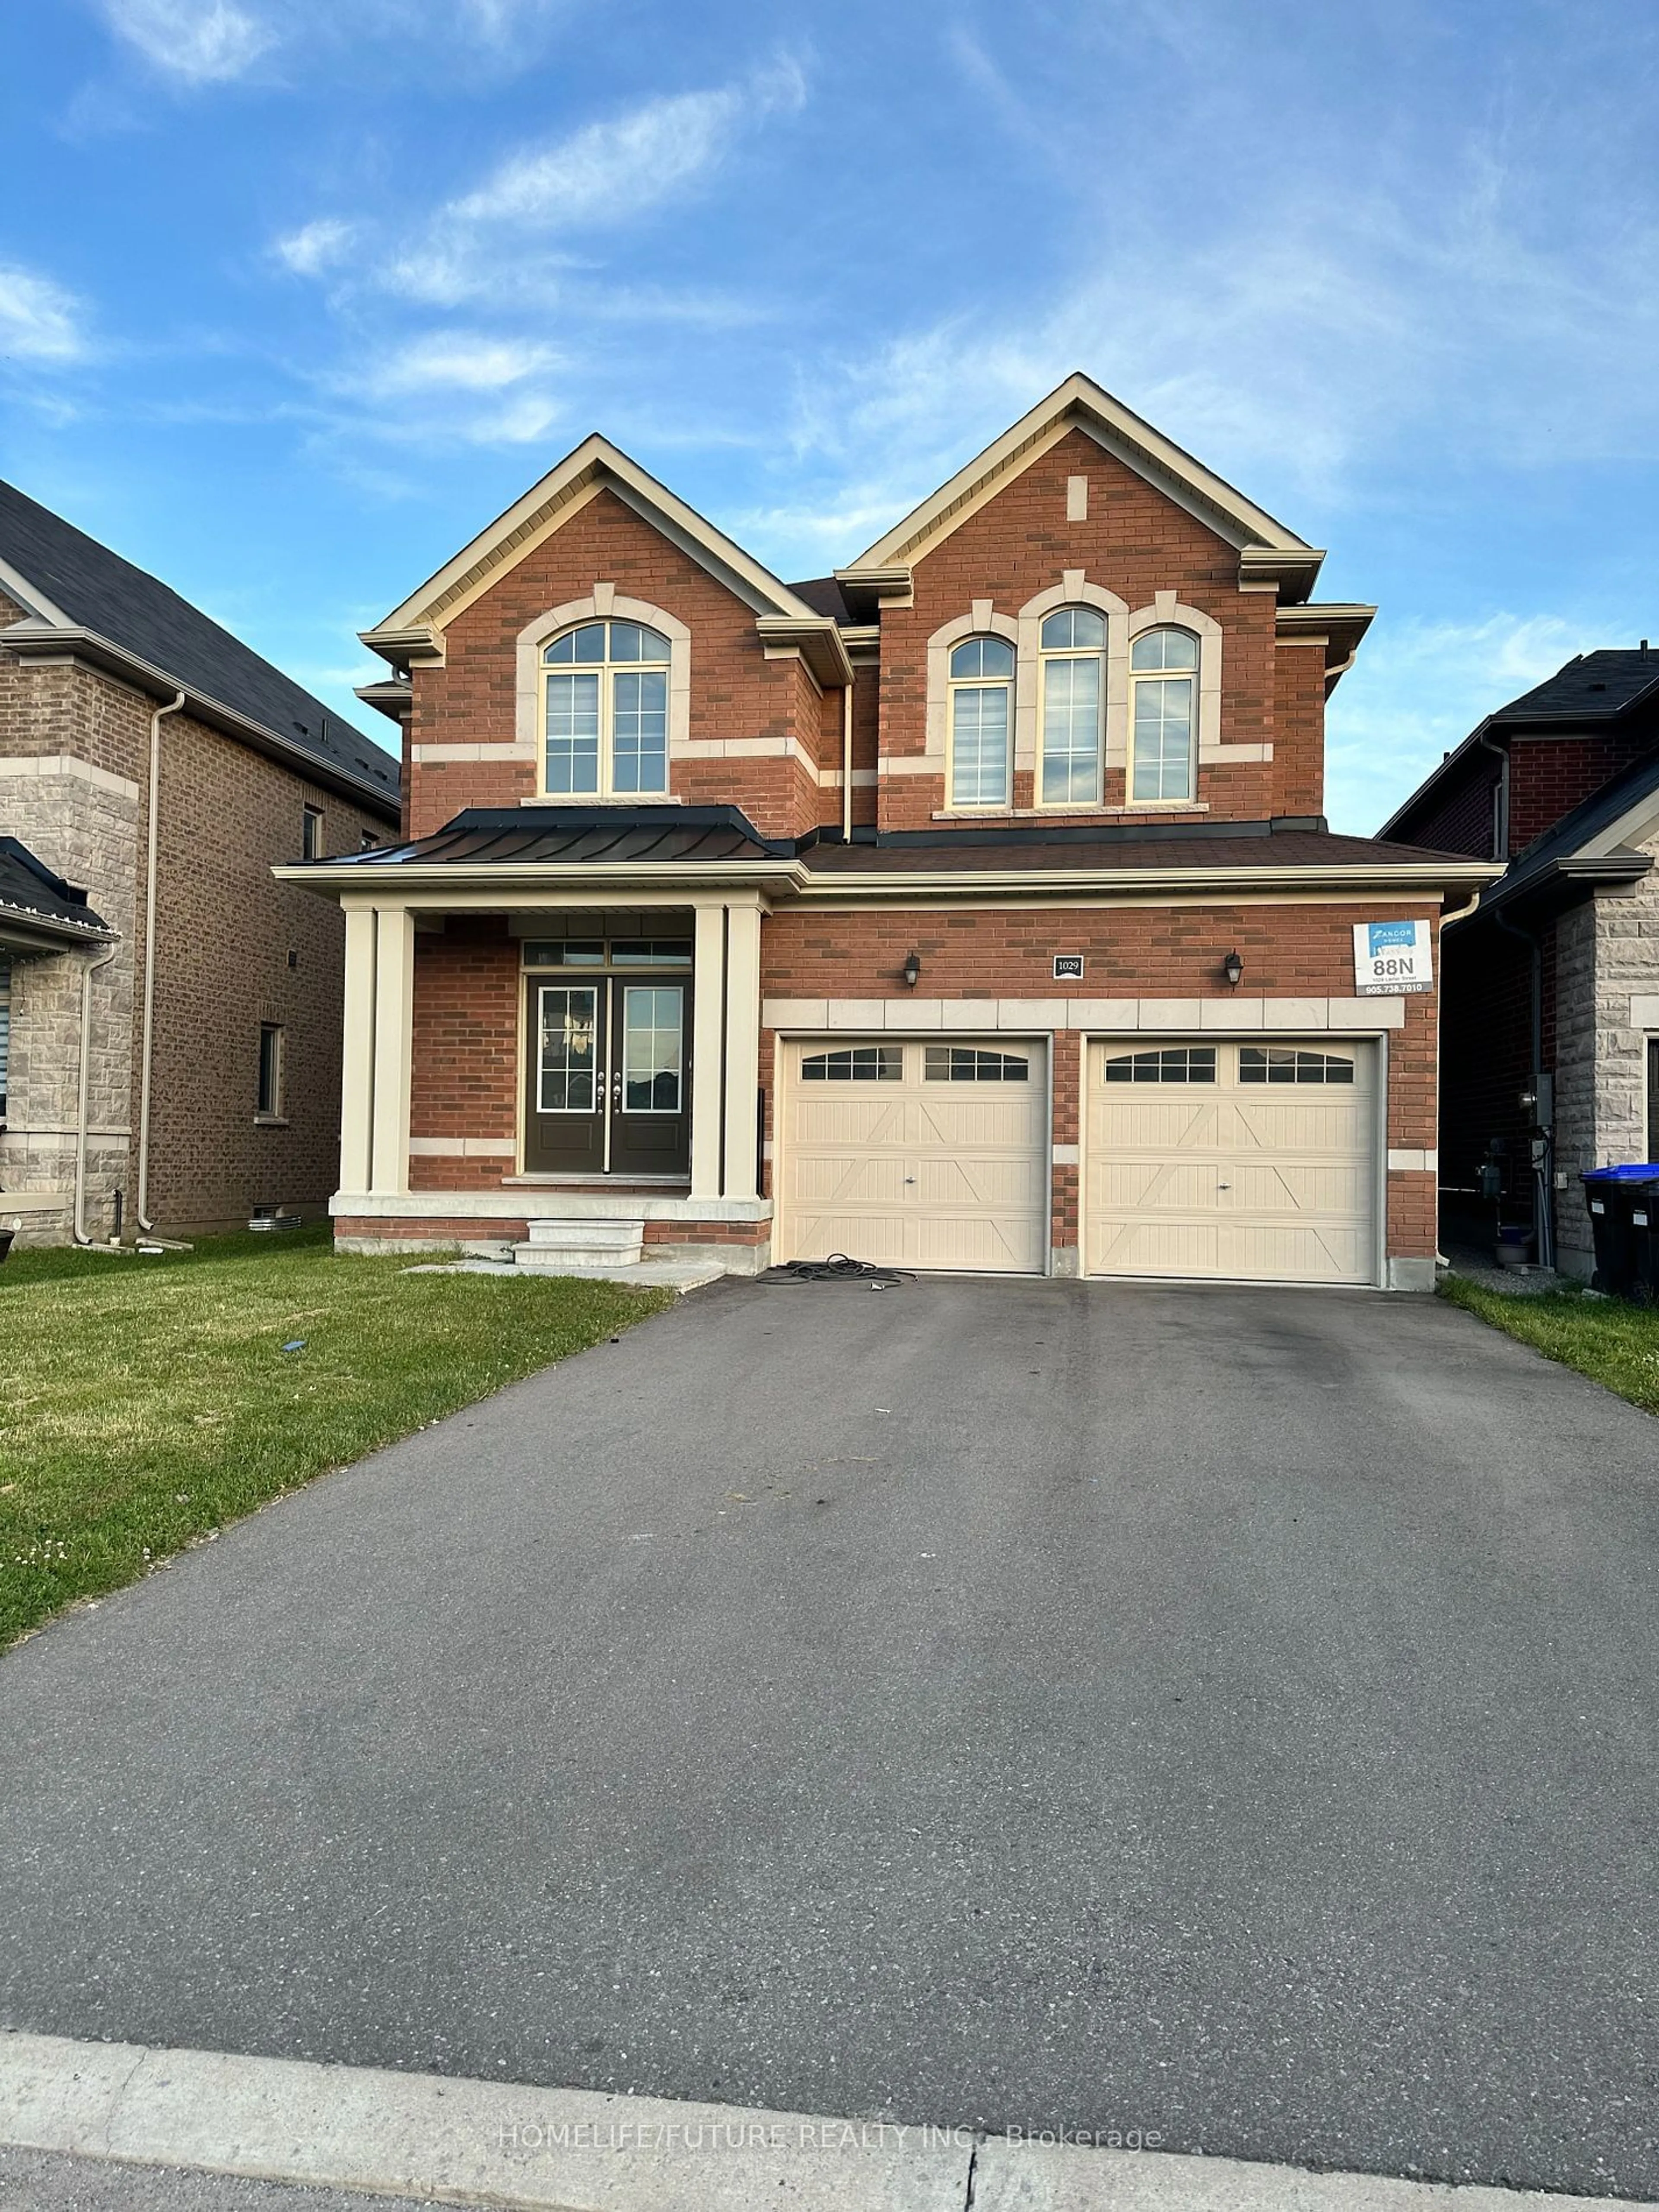 Home with brick exterior material for 1029 Larter St, Innisfil Ontario L9S 0N4